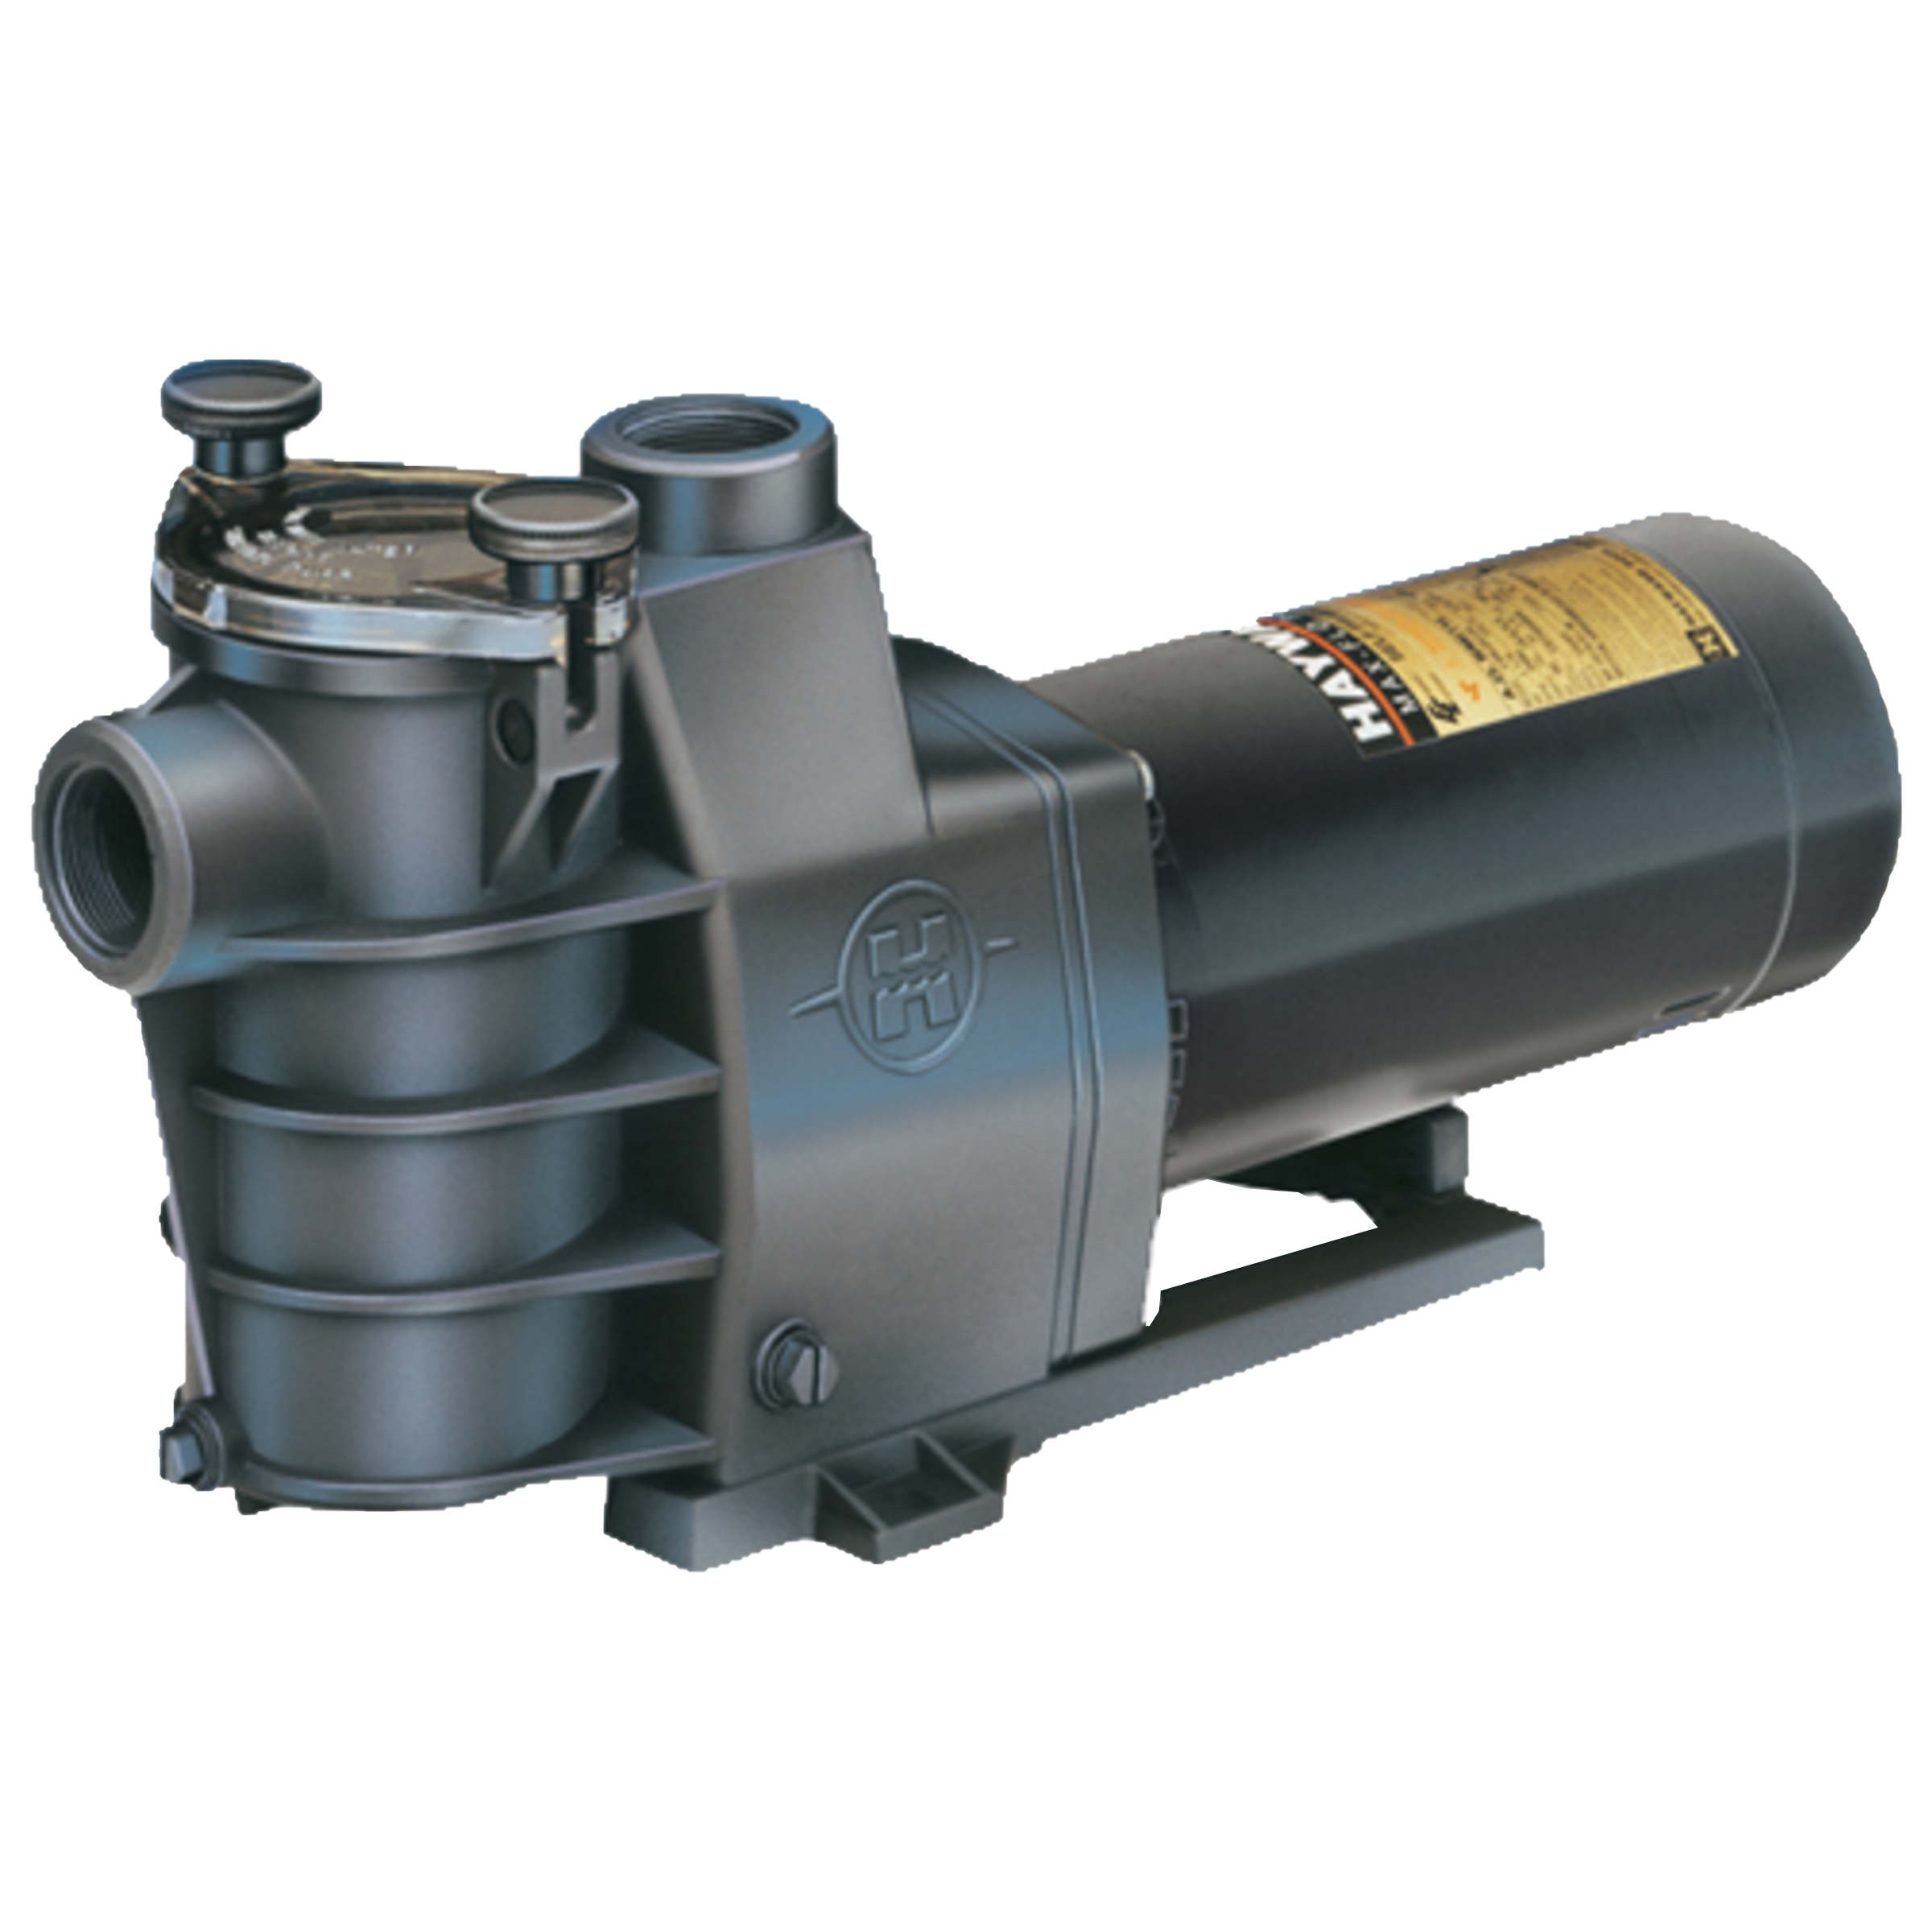 SP2810X15W Hayward Inground 1.5 HP MaxFlo Pump for In-Ground Pools or In-Ground Spas of all Types and sizes, Total H.P. 1.65, Service Factor 1.1